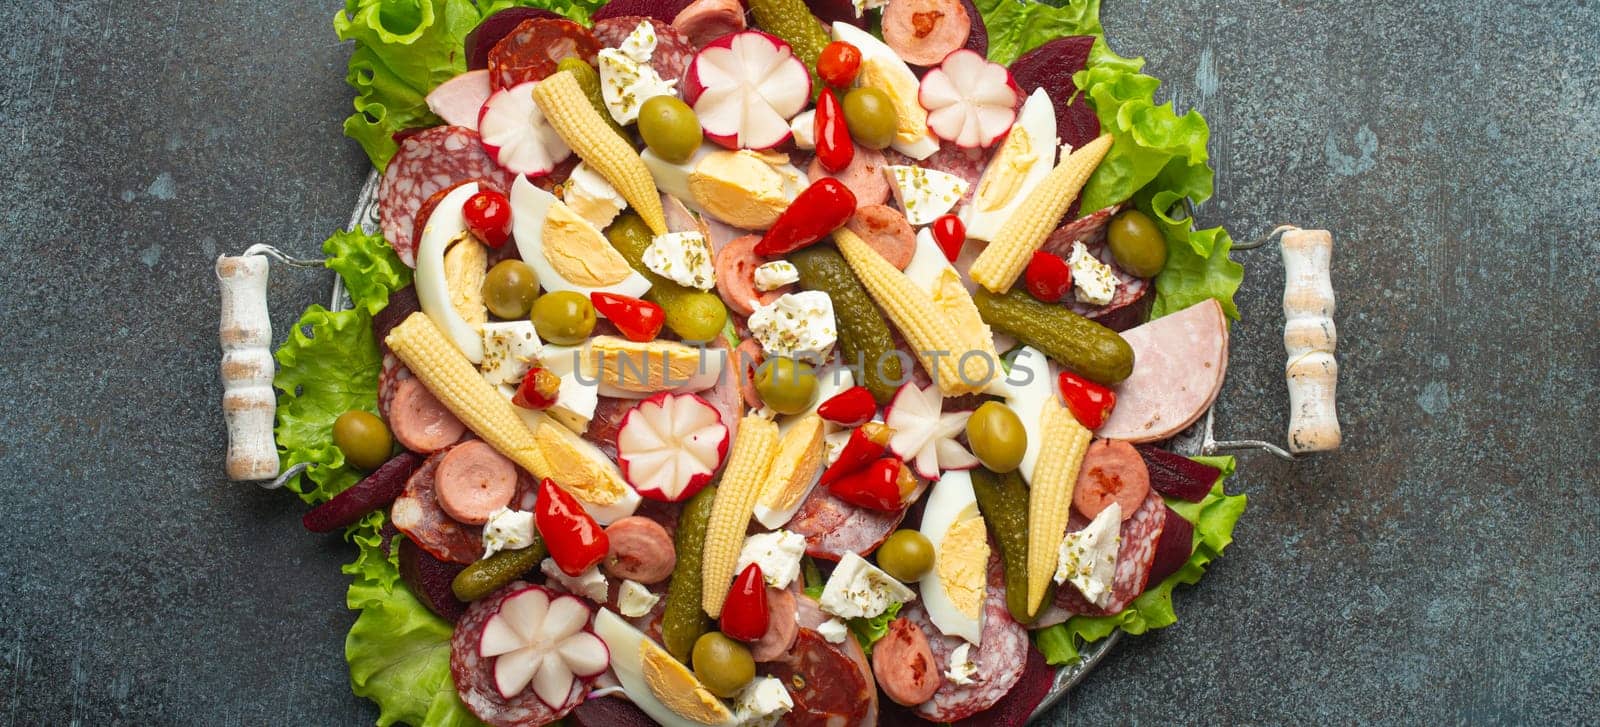 Fiambre, salad of Guatemala, Mexico and Latin America, served on large plate top view. Festive dish for All Saints Day (Day Of The Dead) celebration made of cold cuts, sausages, pickled vegetables.